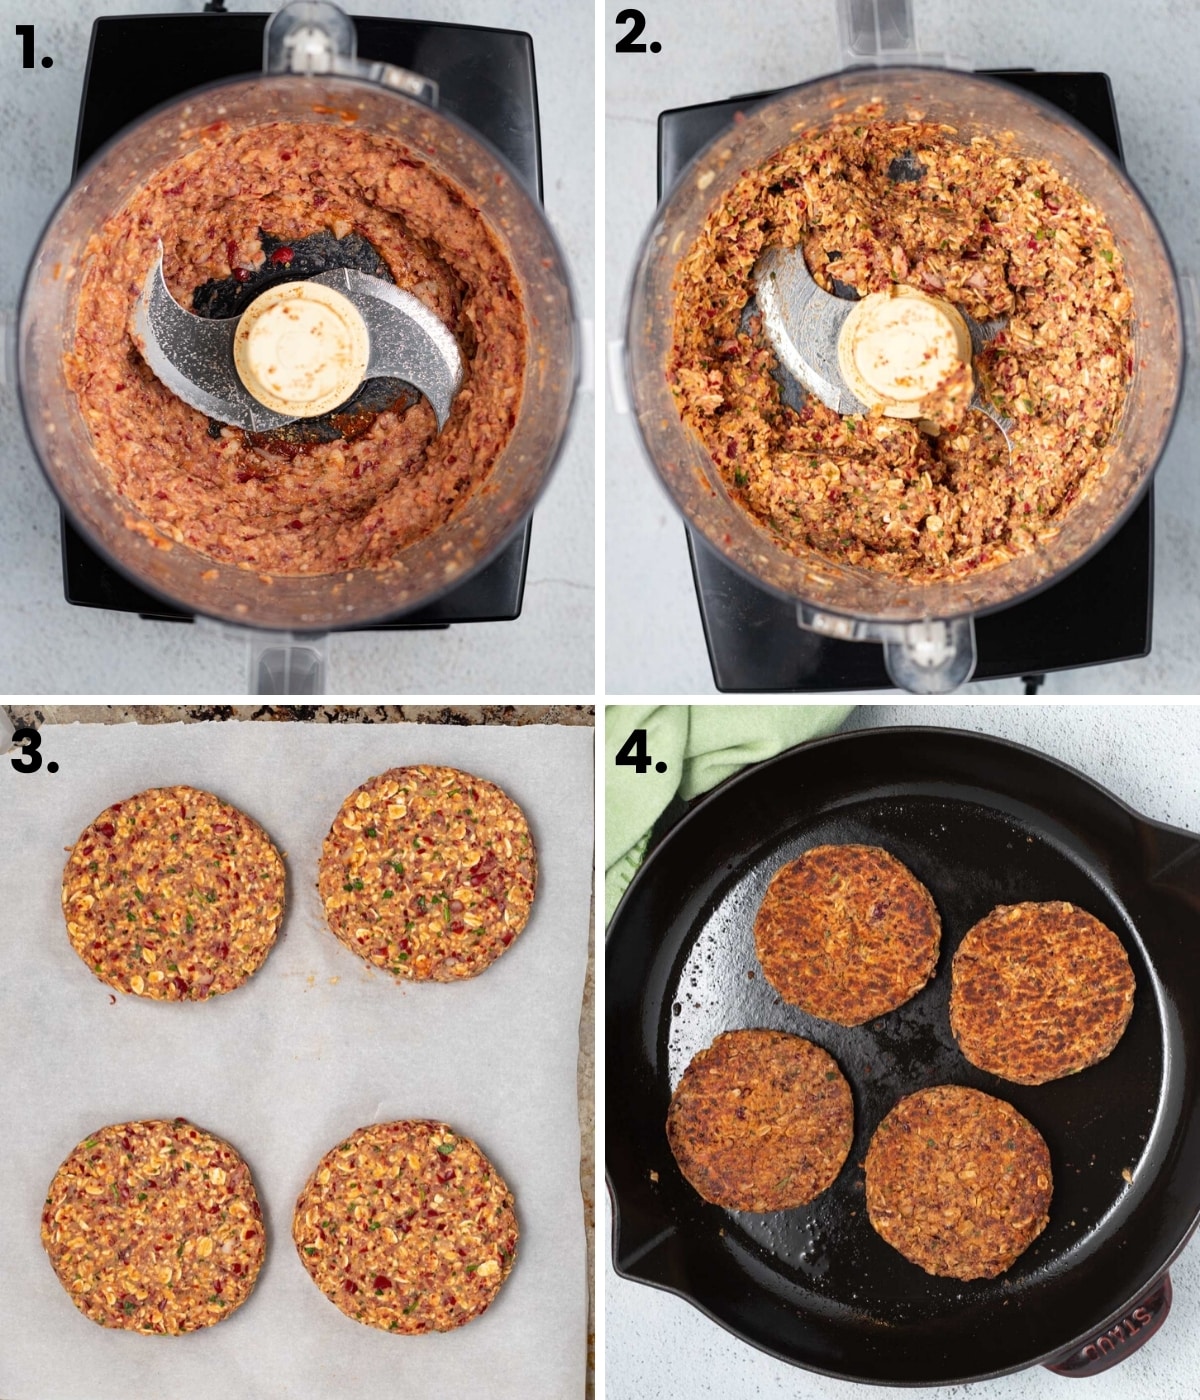 photos showing how to make kidney bean burgers as per the written instructions 